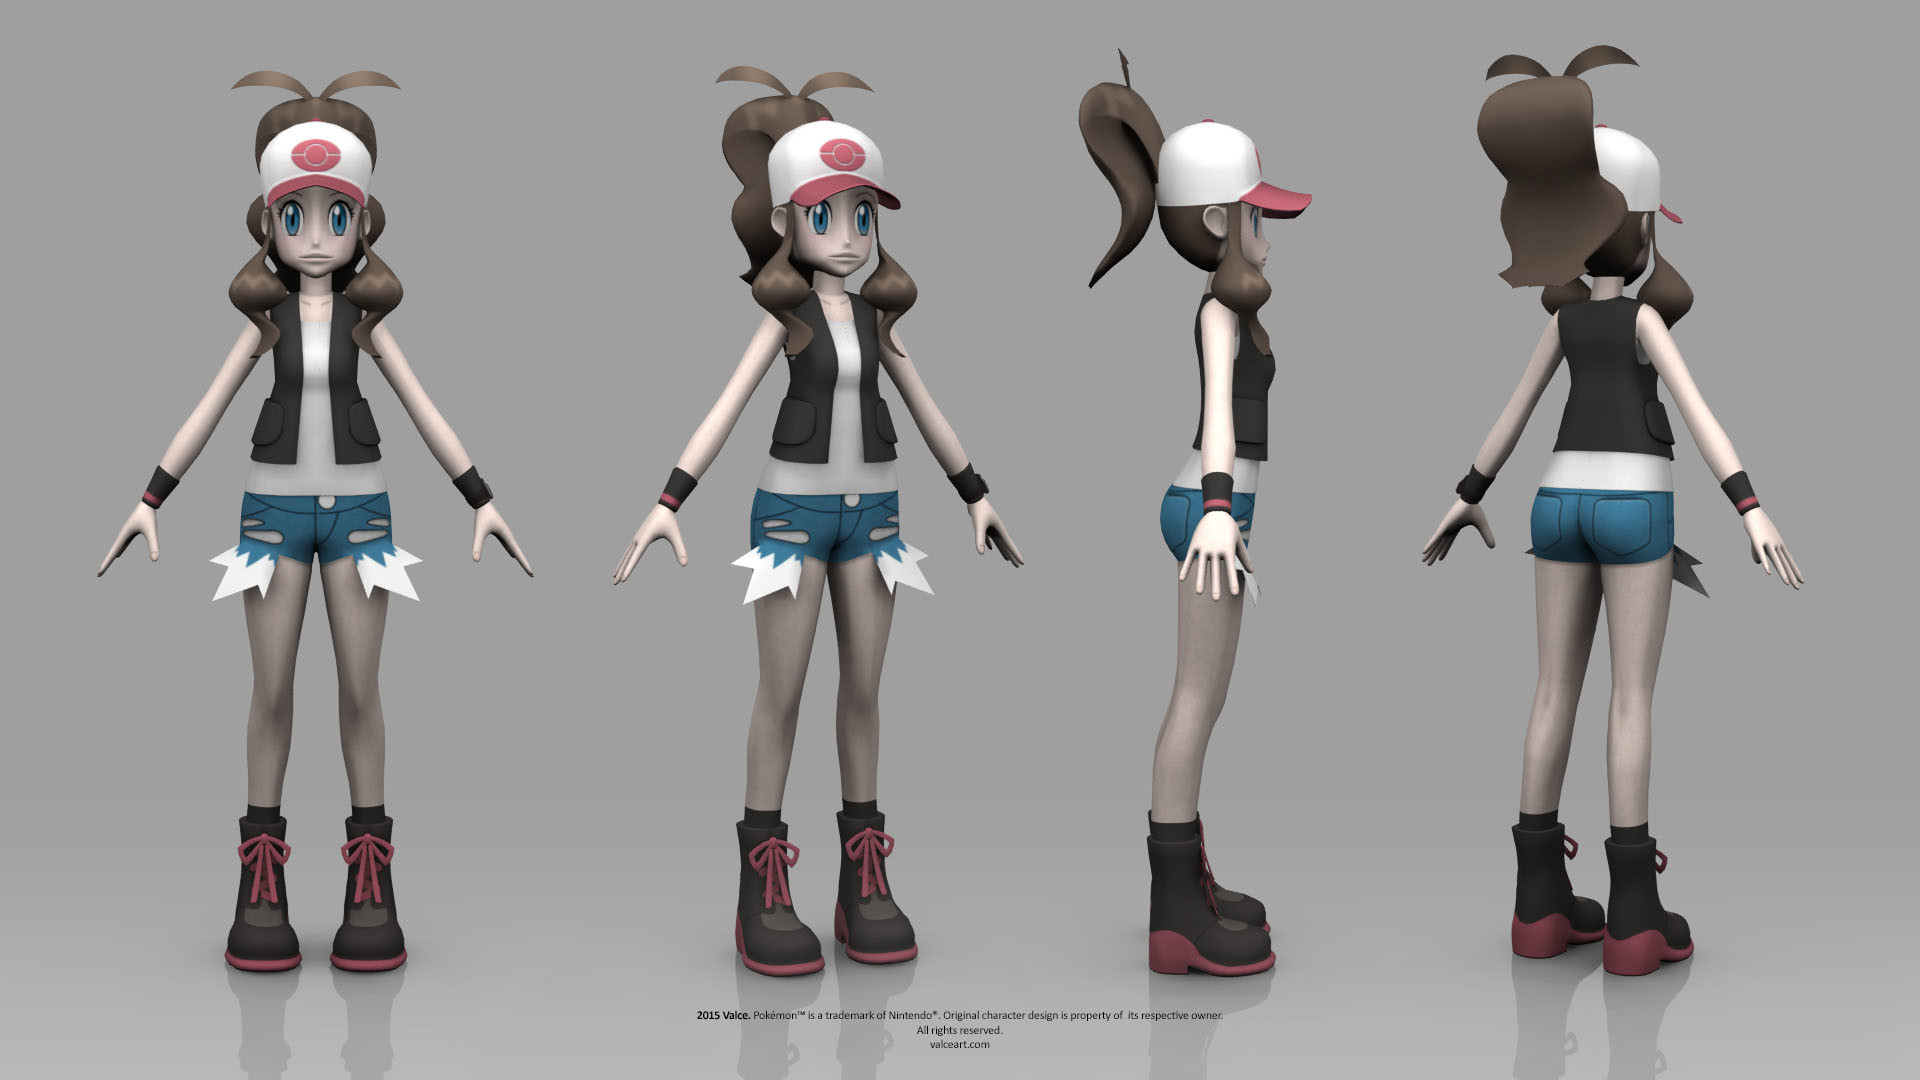 1920x1080 ... Pokemon Black and White - Hilda by TheRealValce